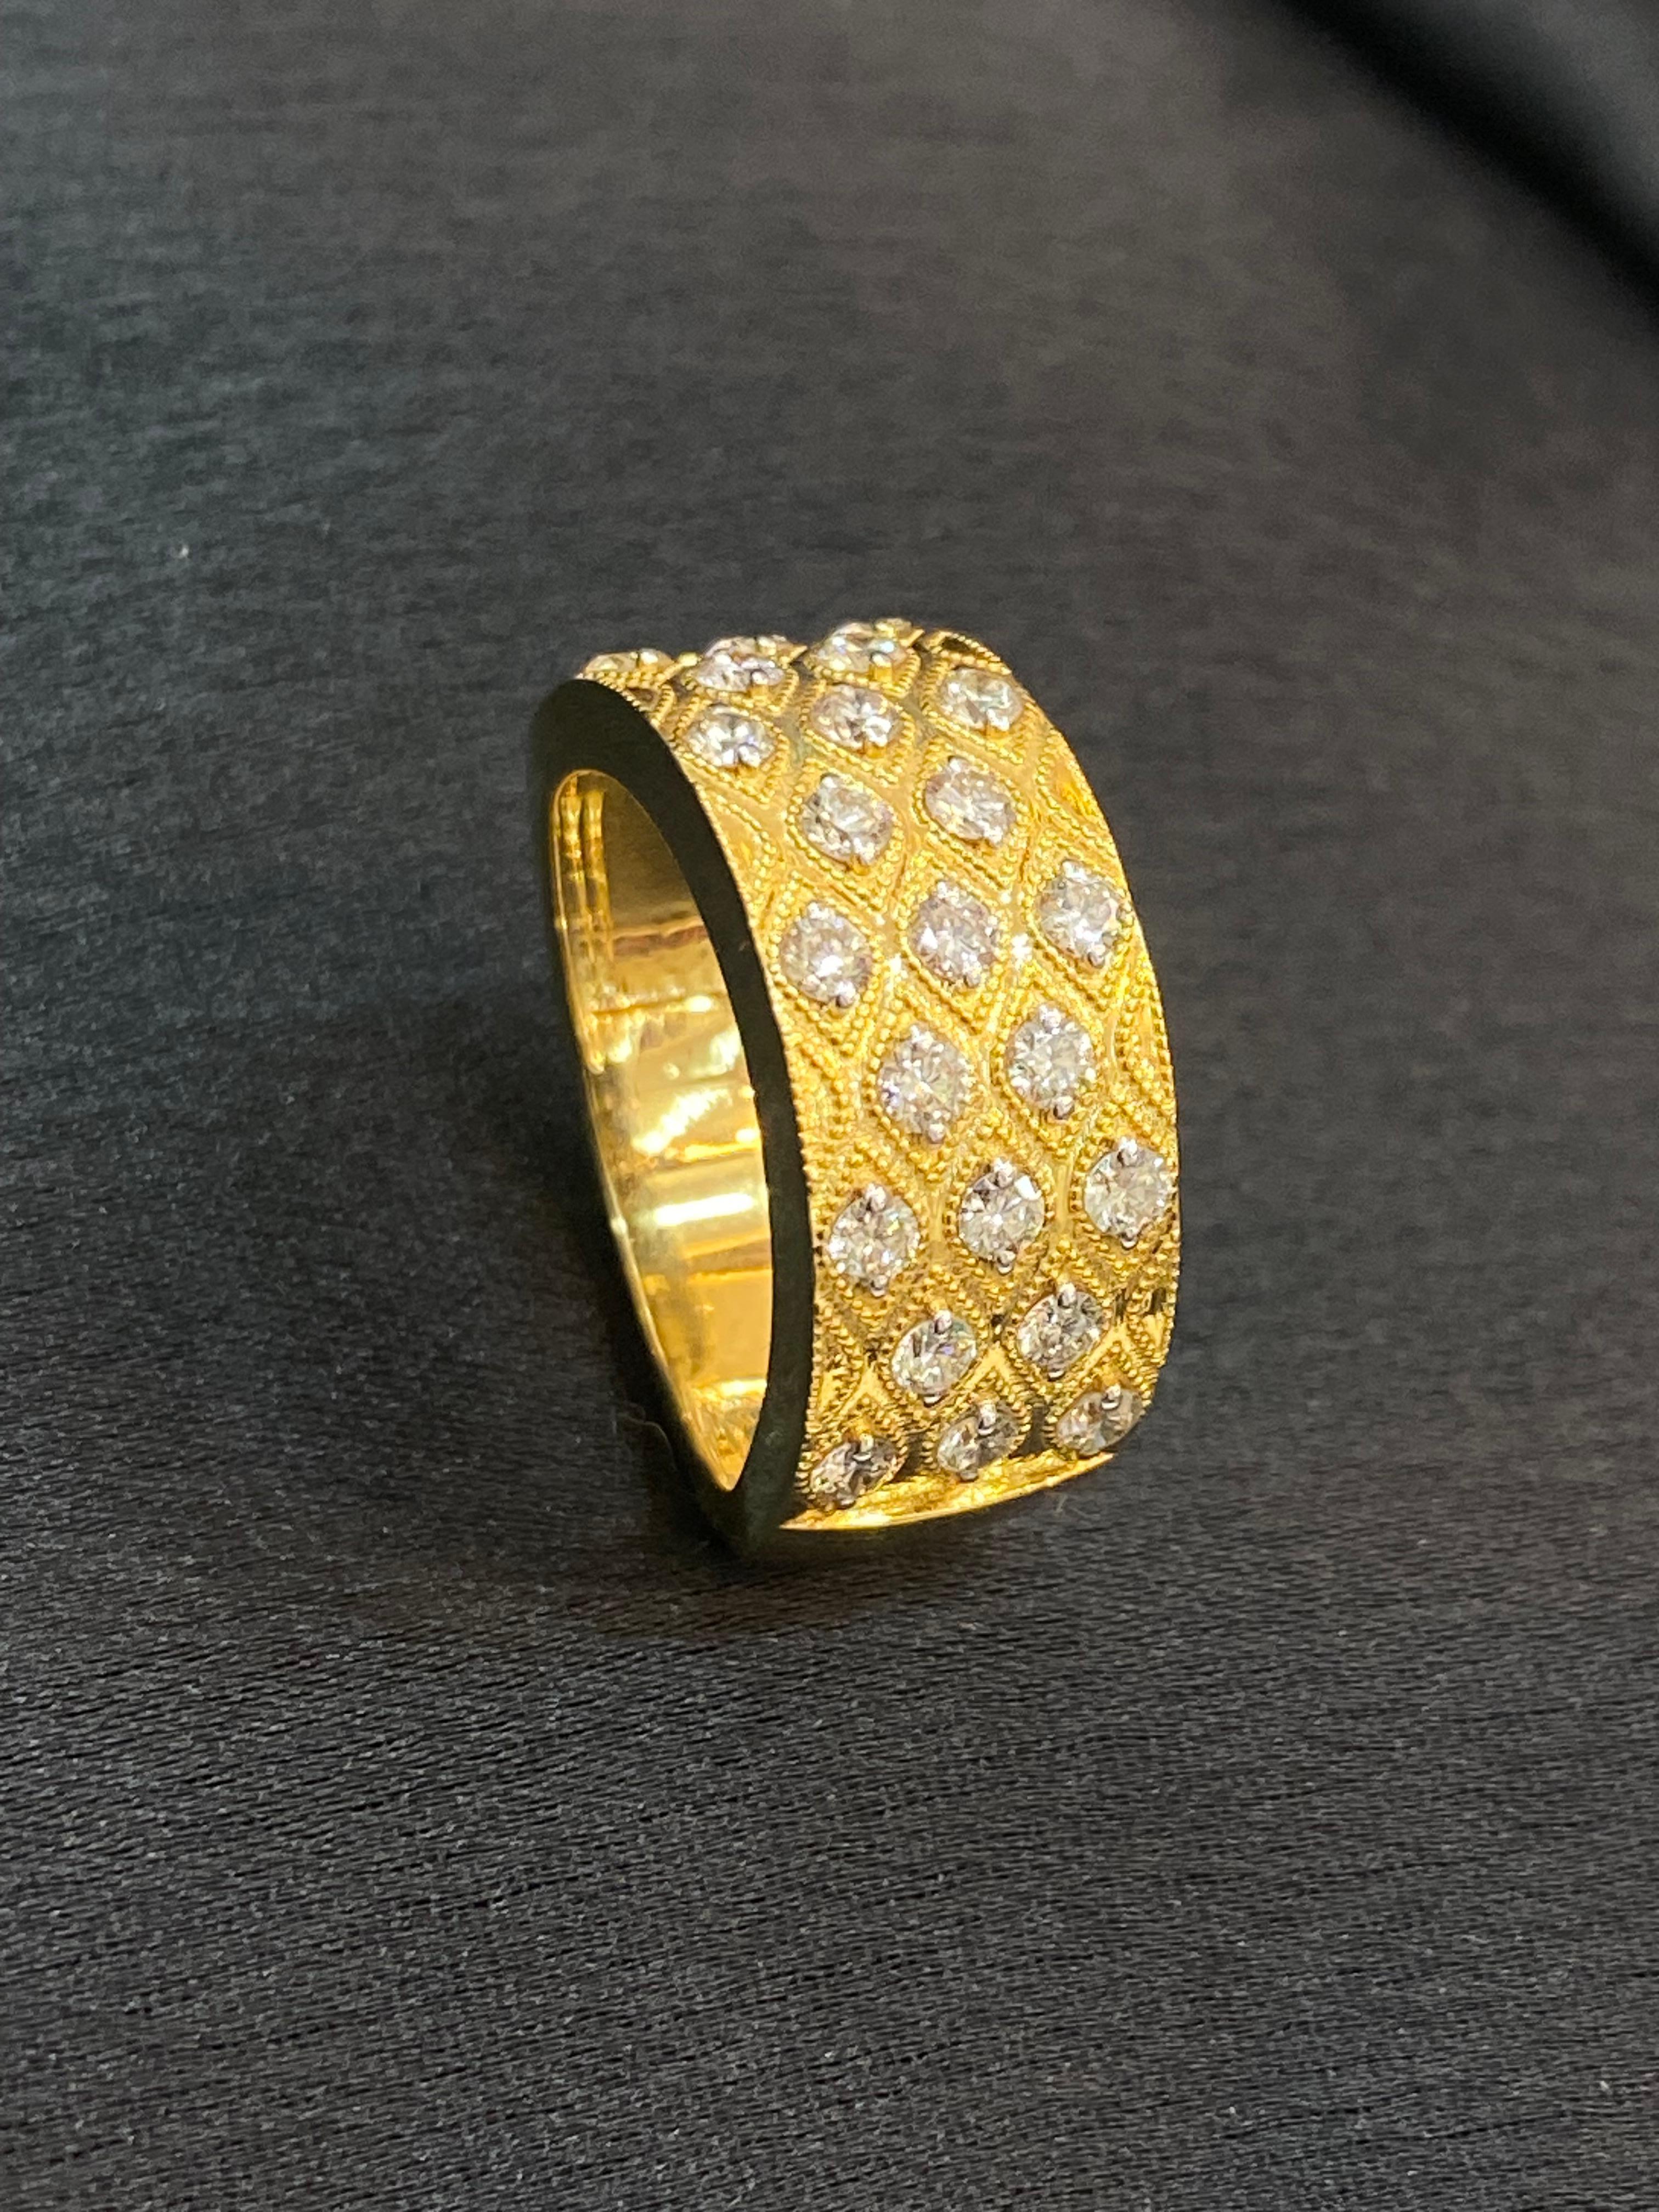 Experience the pinnacle of glamour with these rings. Treat yourself to the enchanting beauty of our remarkable 1.10 carat diamond unisex ring, crafted in 14k yellow gold, designed to evoke perpetual smiles and radiance!

Specifications : 
Diamond